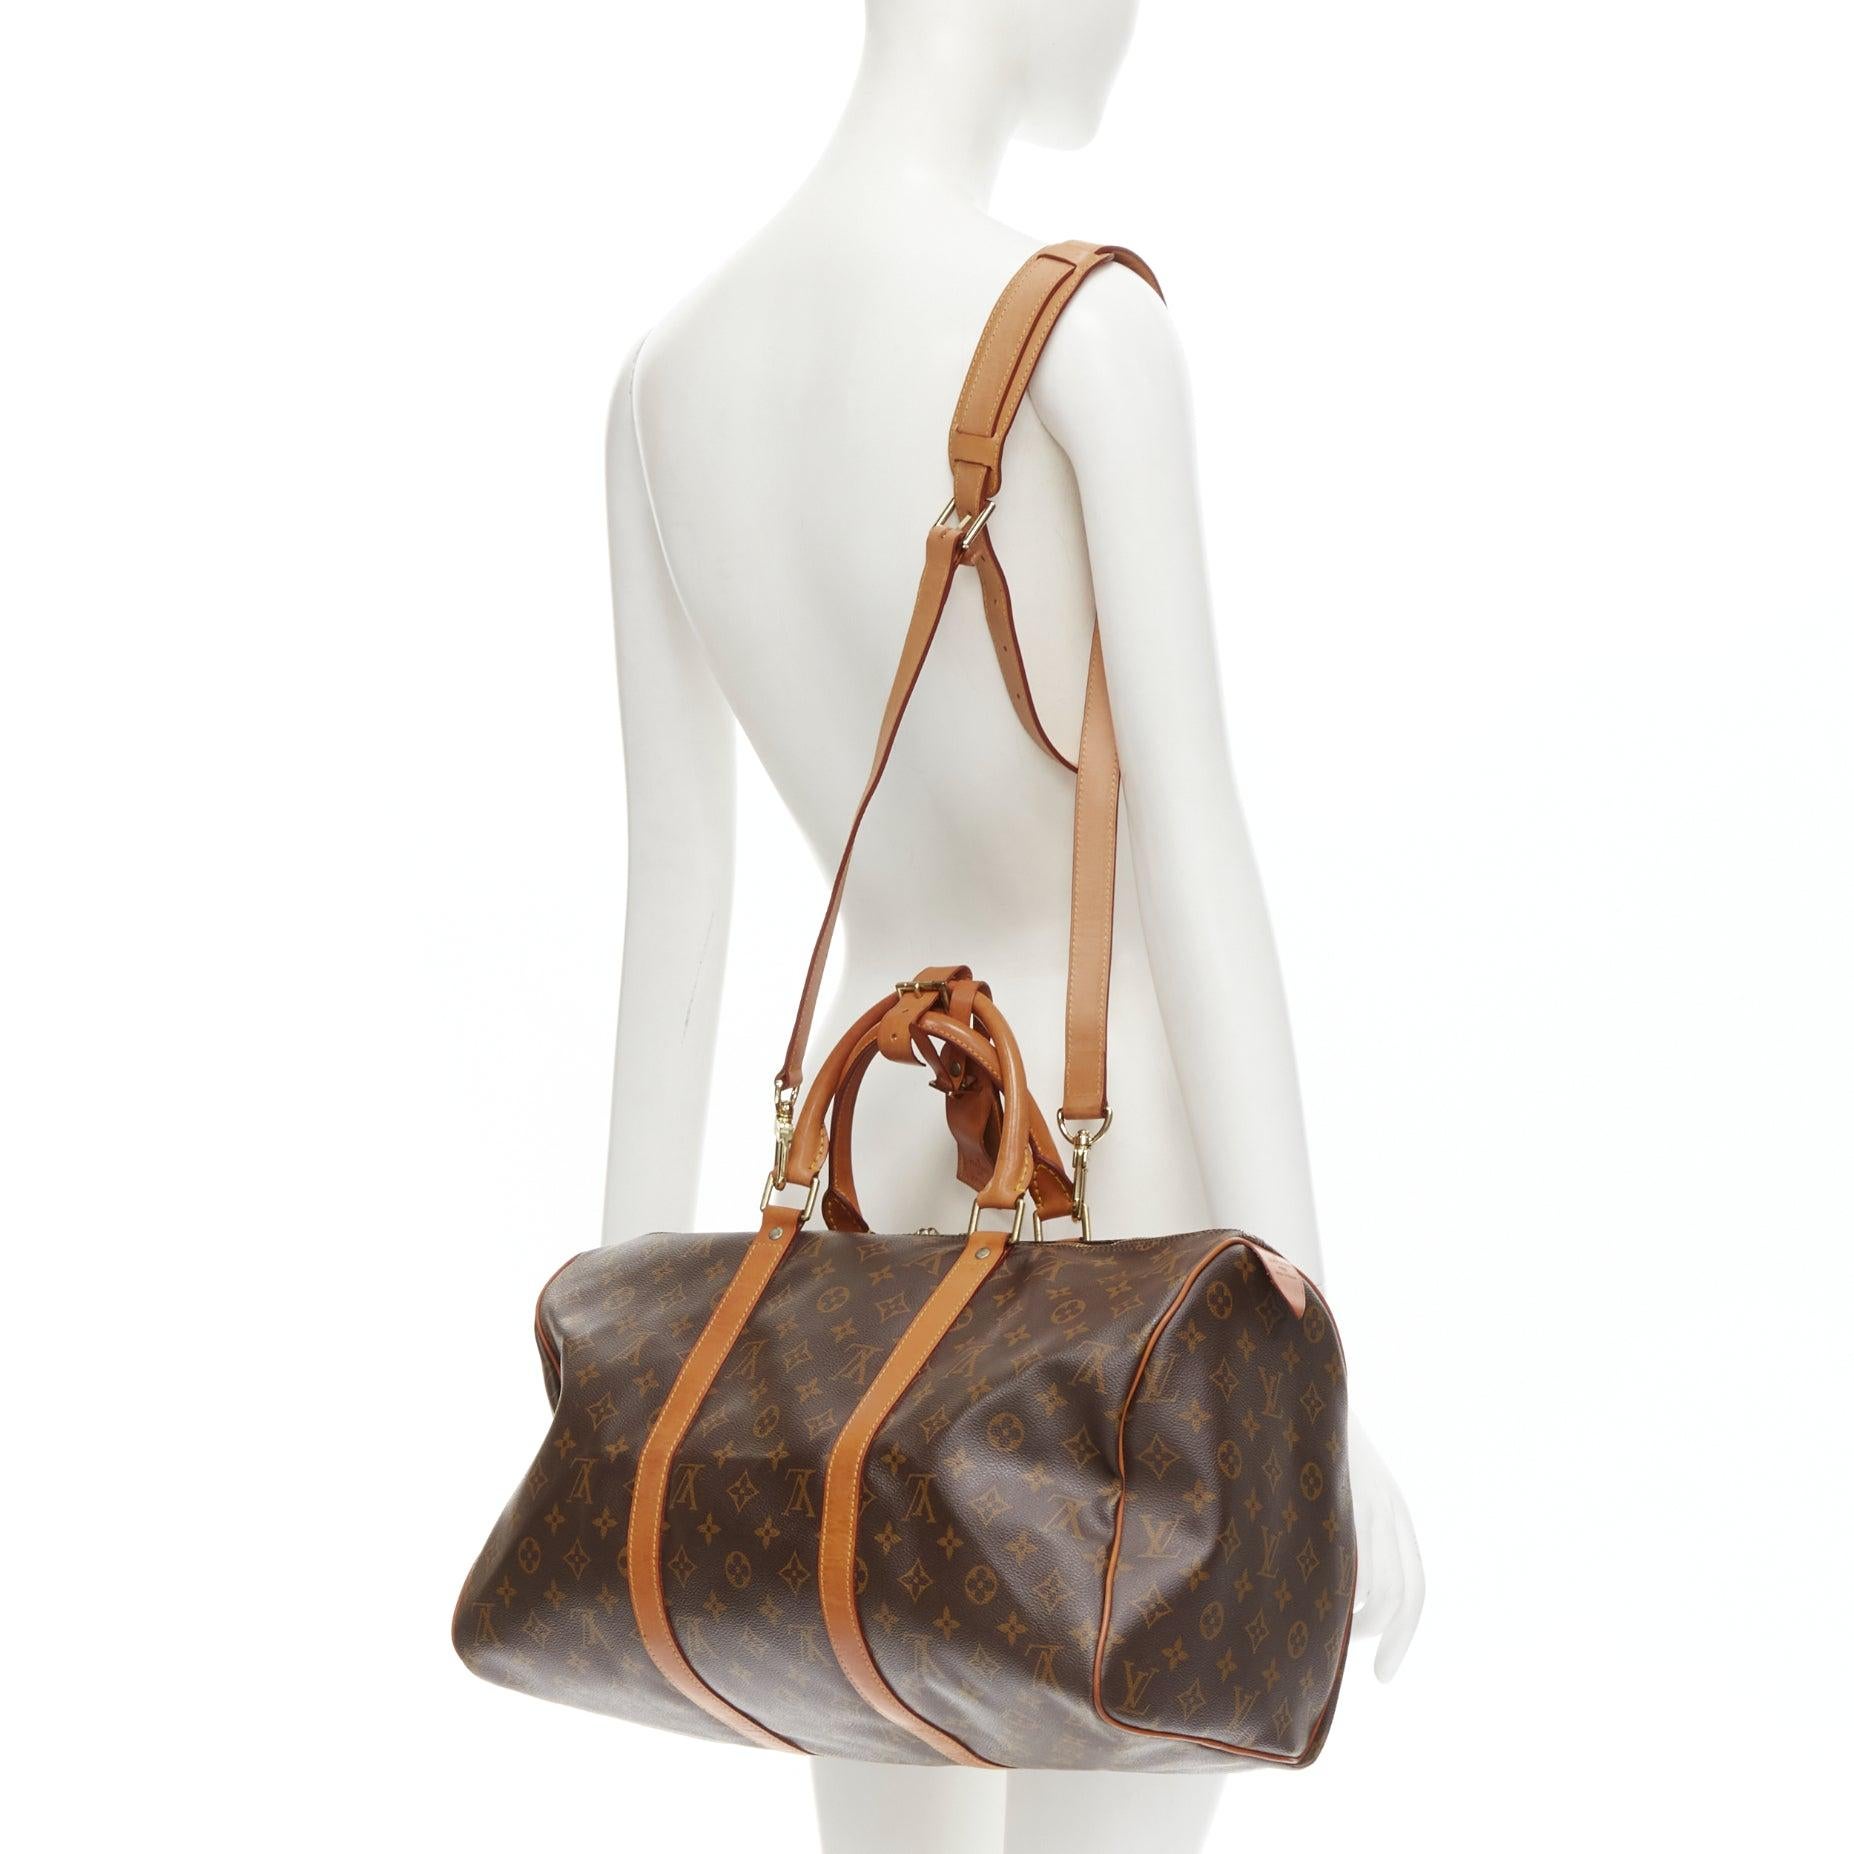 LOUIS VUITTON Vintage Keepall 45 brown monogram canvas leather trim carryall bag
Reference: AEMA/A00076
Brand: Louis Vuitton
Model: Speedy 45
Material: Canvas, Leather
Color: Brown
Pattern: Solid
Closure: Zip
Lining: Fabric
Extra Details: Speedy